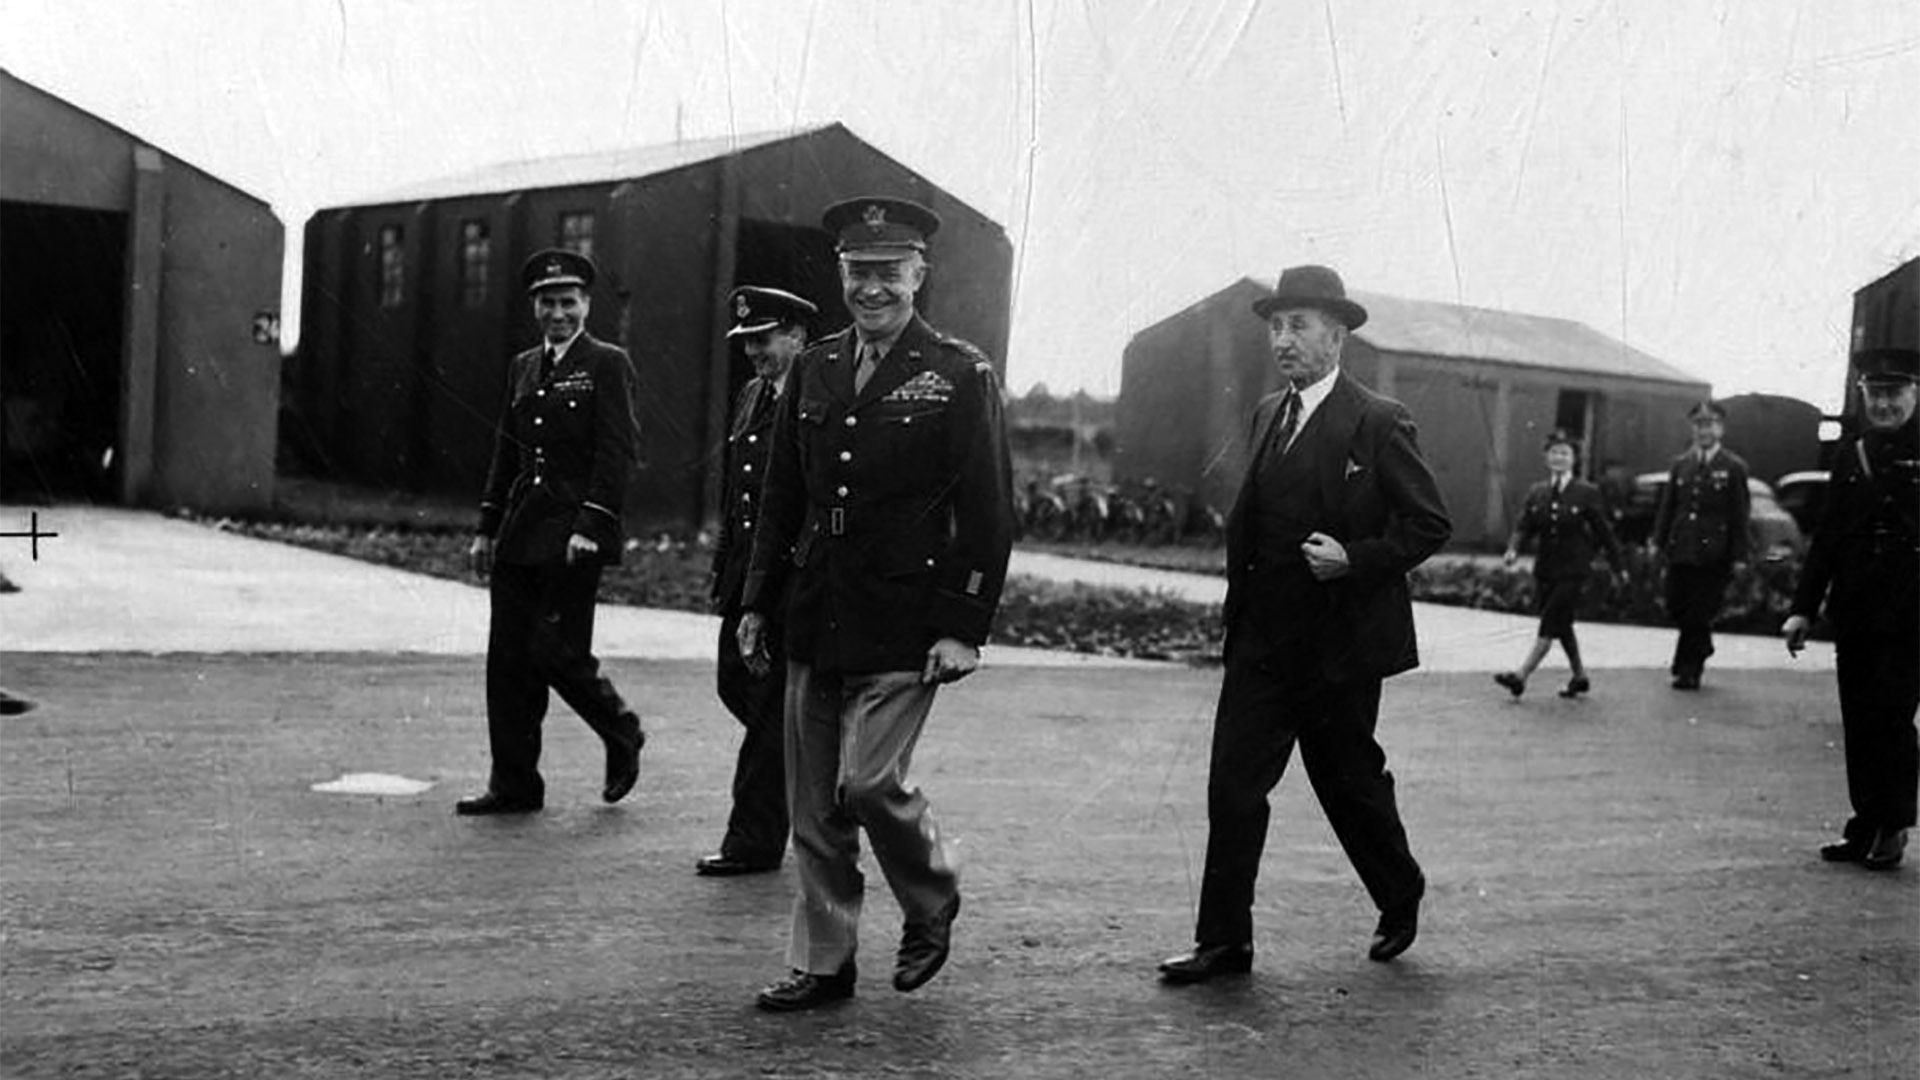 General Dwight D. Eisenhower, Supreme Commander of the Allied Forces in Europe at the airfield at Long Kesh, Co. Down marking the end of his visit to Ulster.